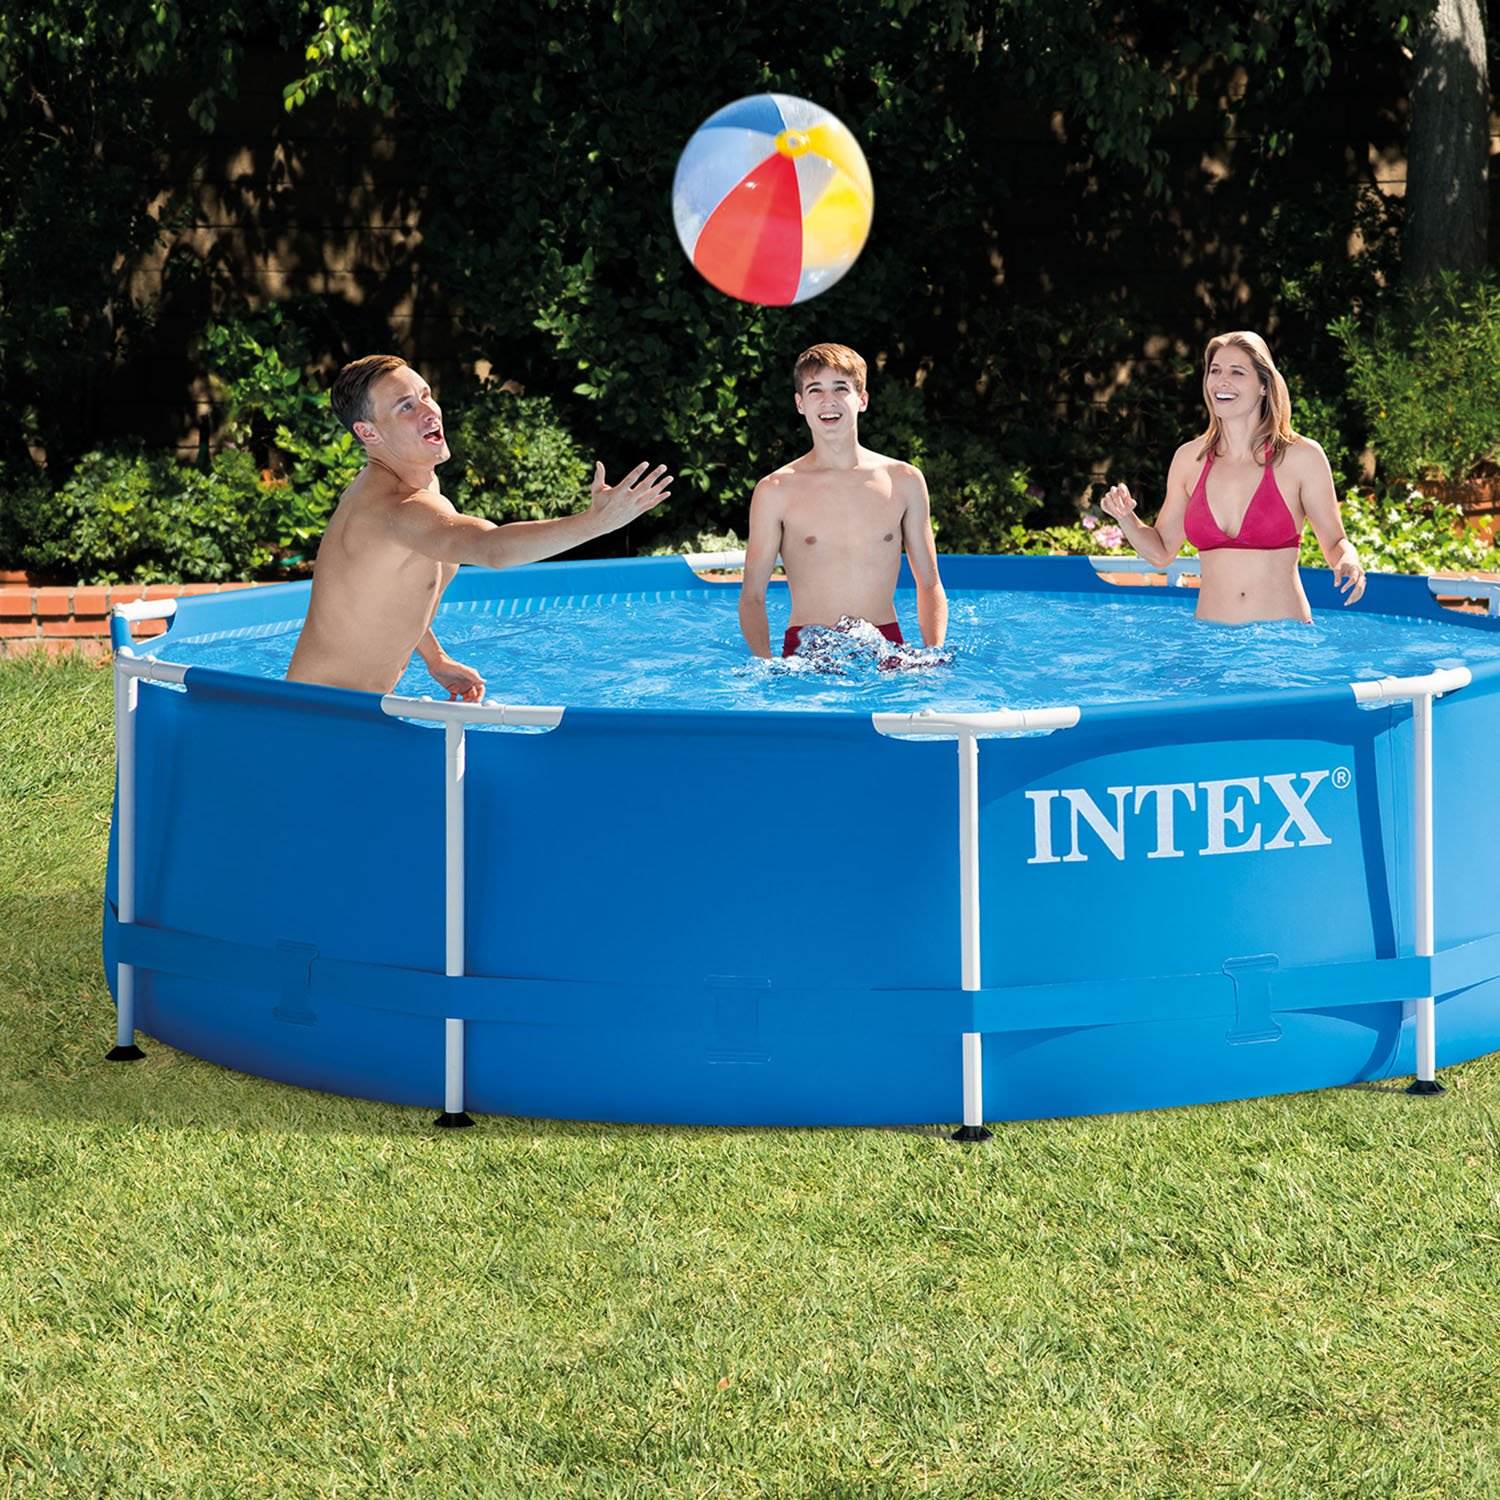 Intex 10 Ft x 30 In Above Ground Round Swimming Pool, (Pump Not Included) - image 4 of 4